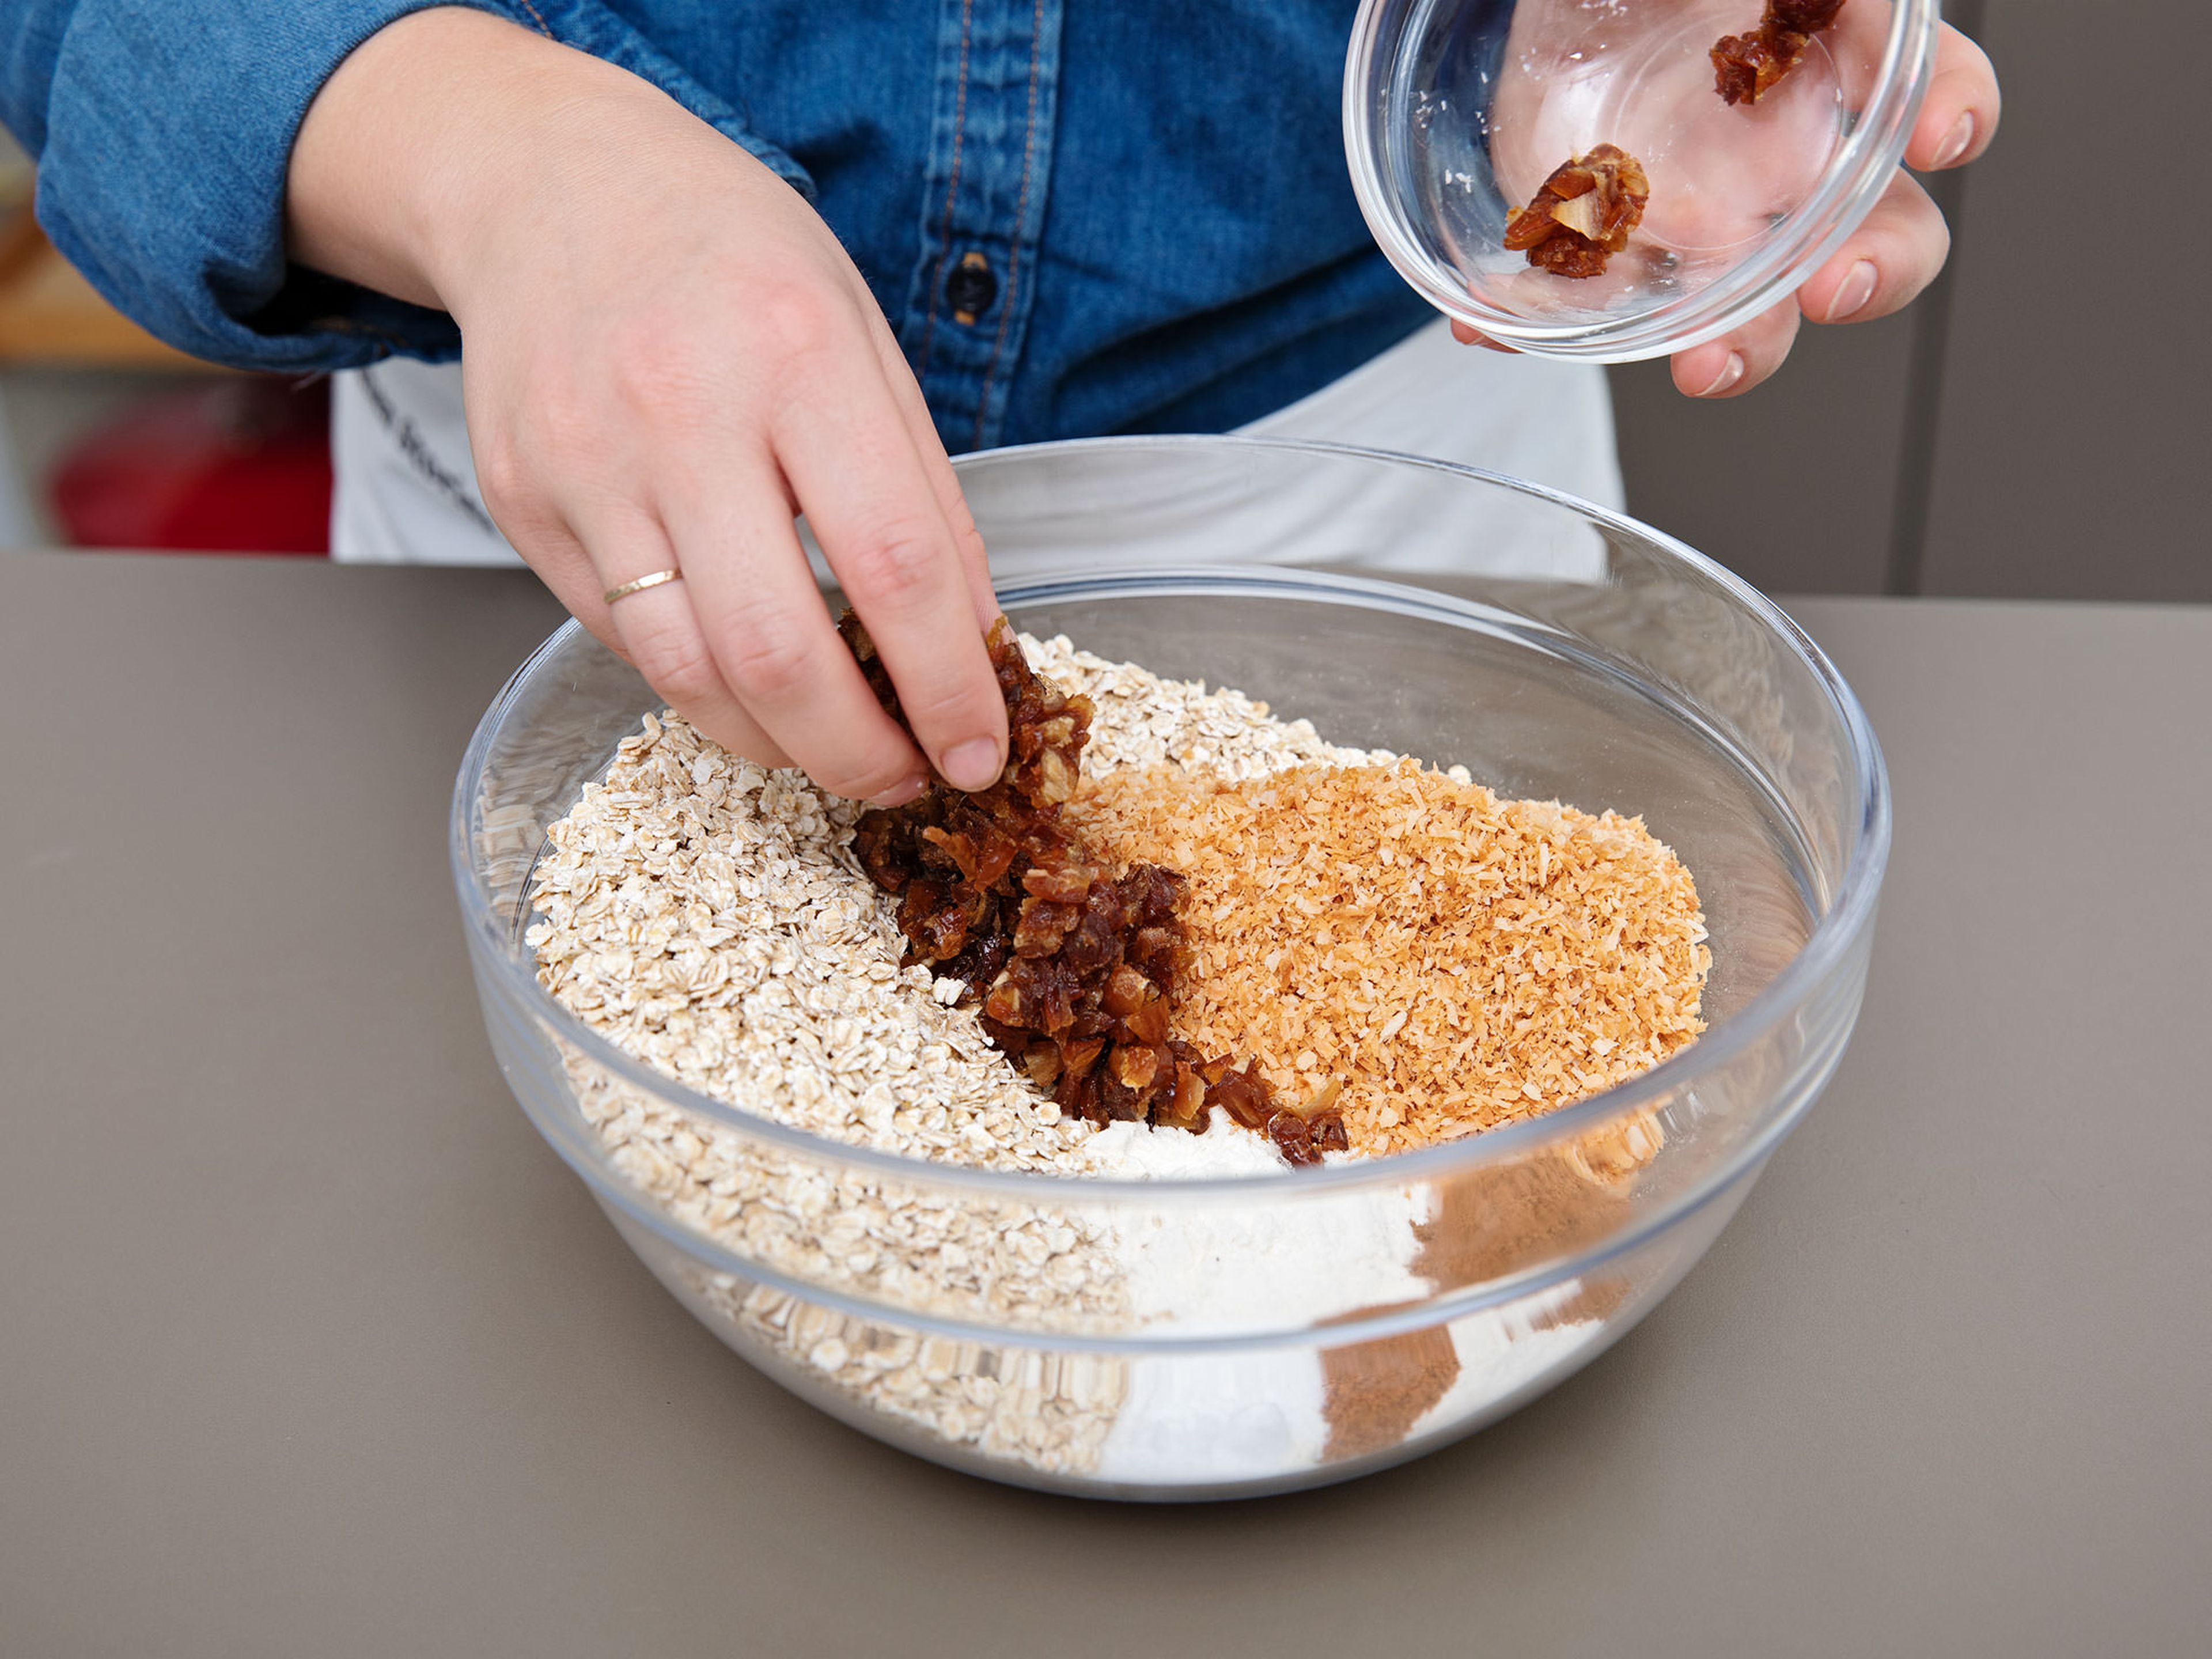 In a large bowl, whisk together the flour, cinnamon, nutmeg, salt, baking soda, rolled oats, chopped dates, and toasted coconut. Add mixture to the stand mixer and beat until just combined.